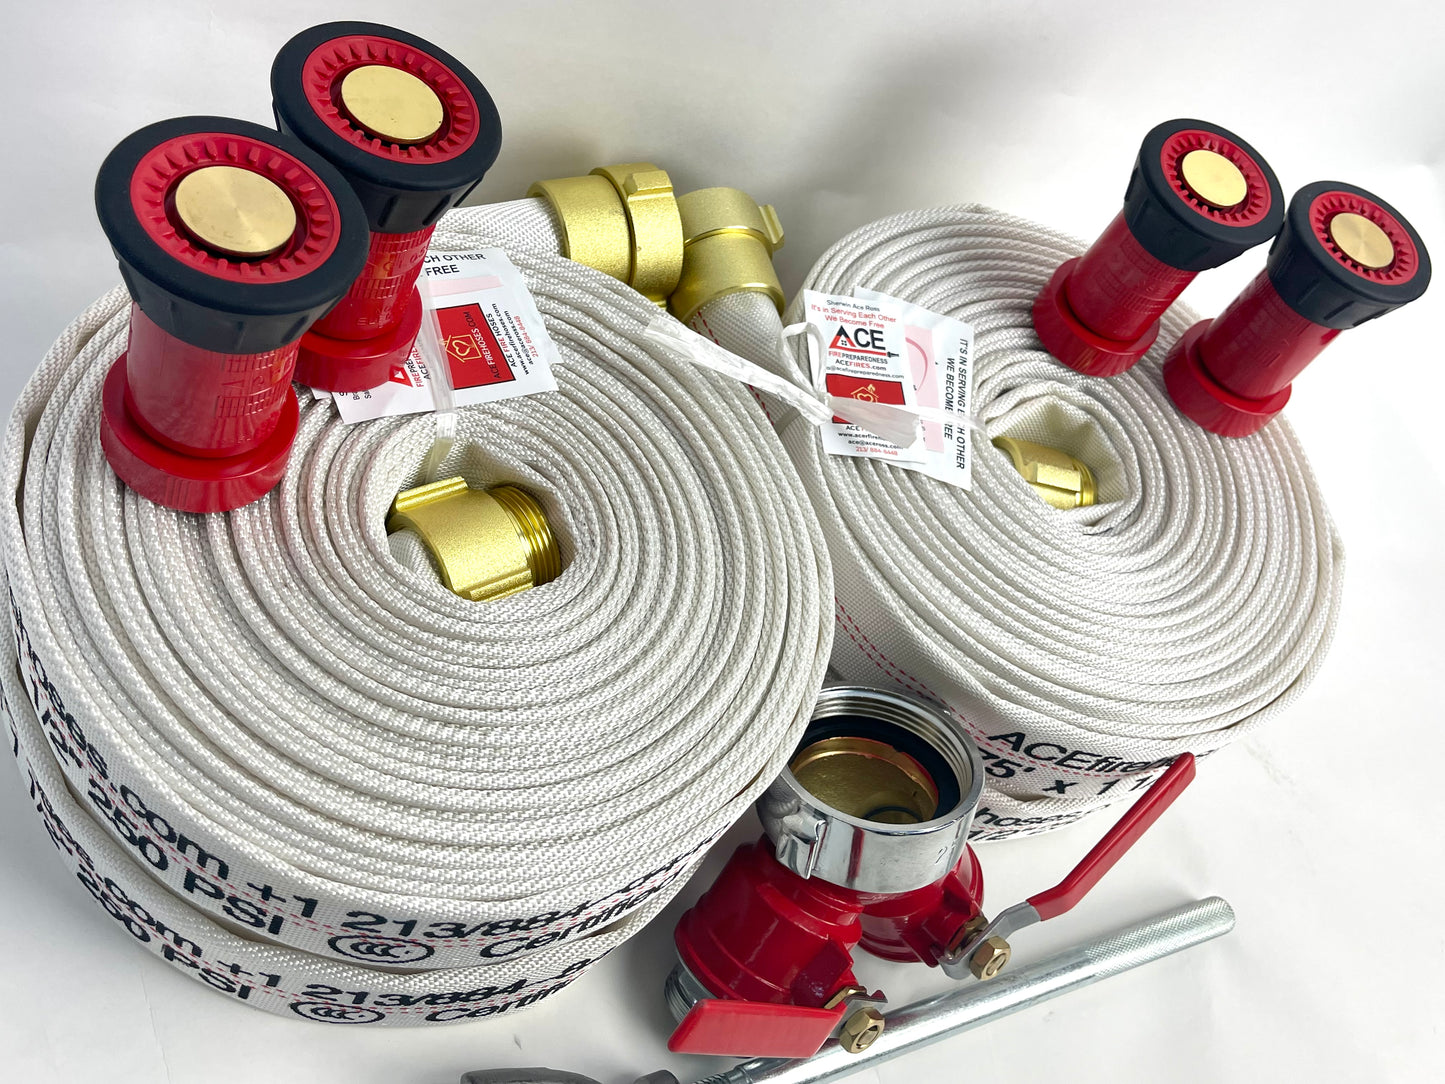 Fire-Safe Home Bundle Package 4 75' x 1.5" hoses, 4 nozzles, valve, wrench FM Approved